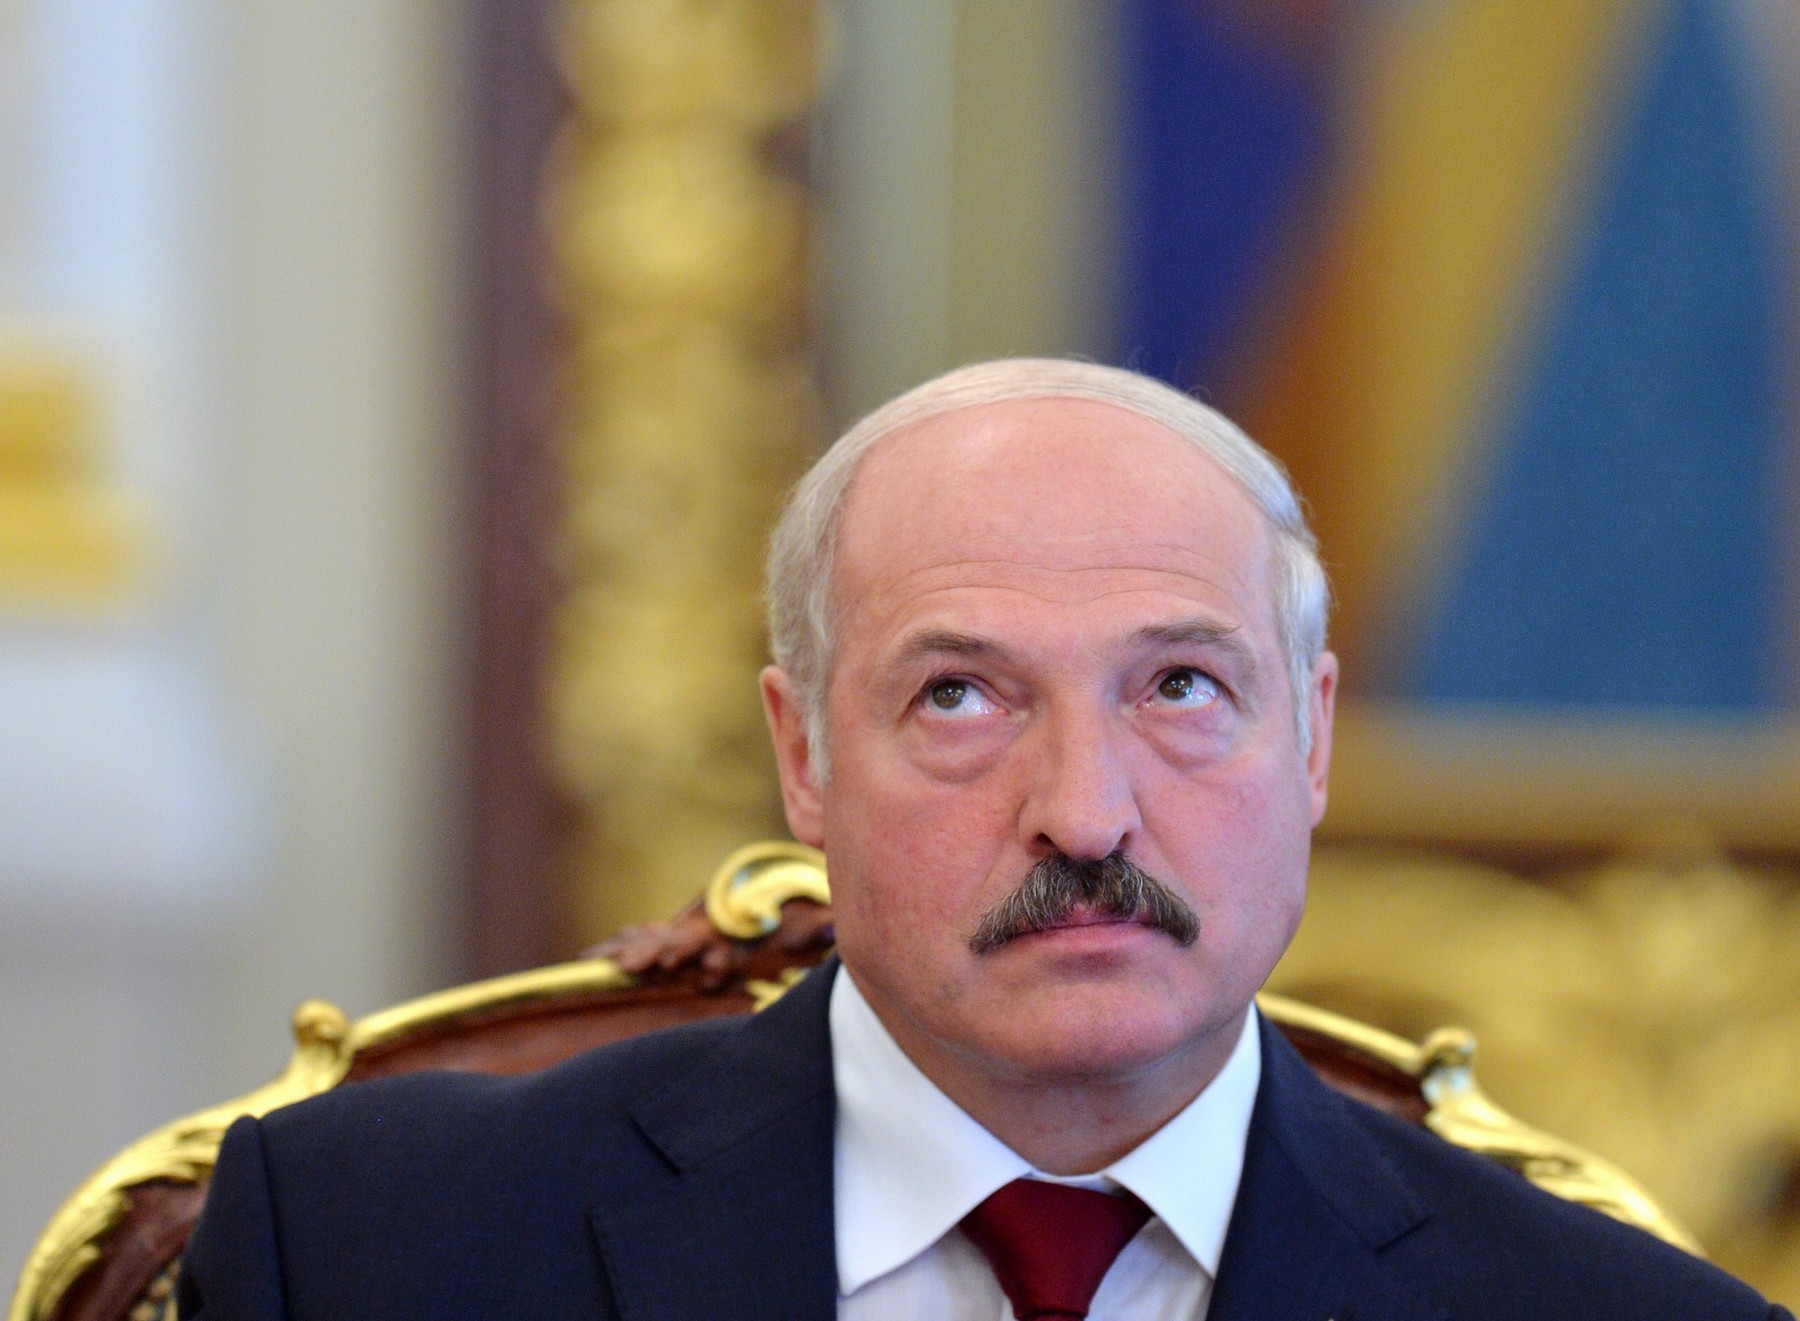 President Lukashenka steers clear of publicly discussing socio-economic agenda